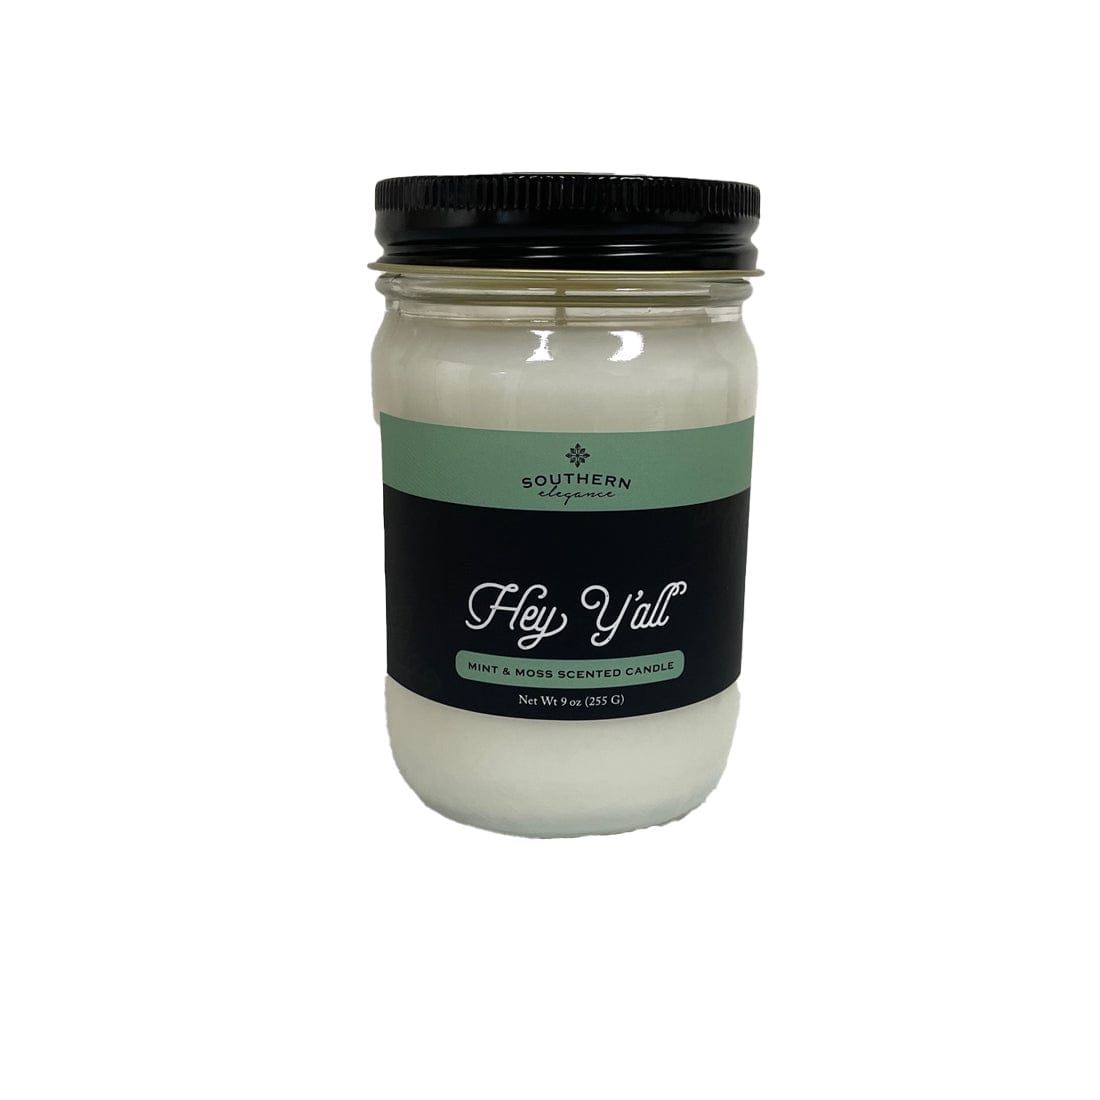 Southern Elegance Candle Co Southern Elegance Candle Co Hey Y all 9 oz Candle